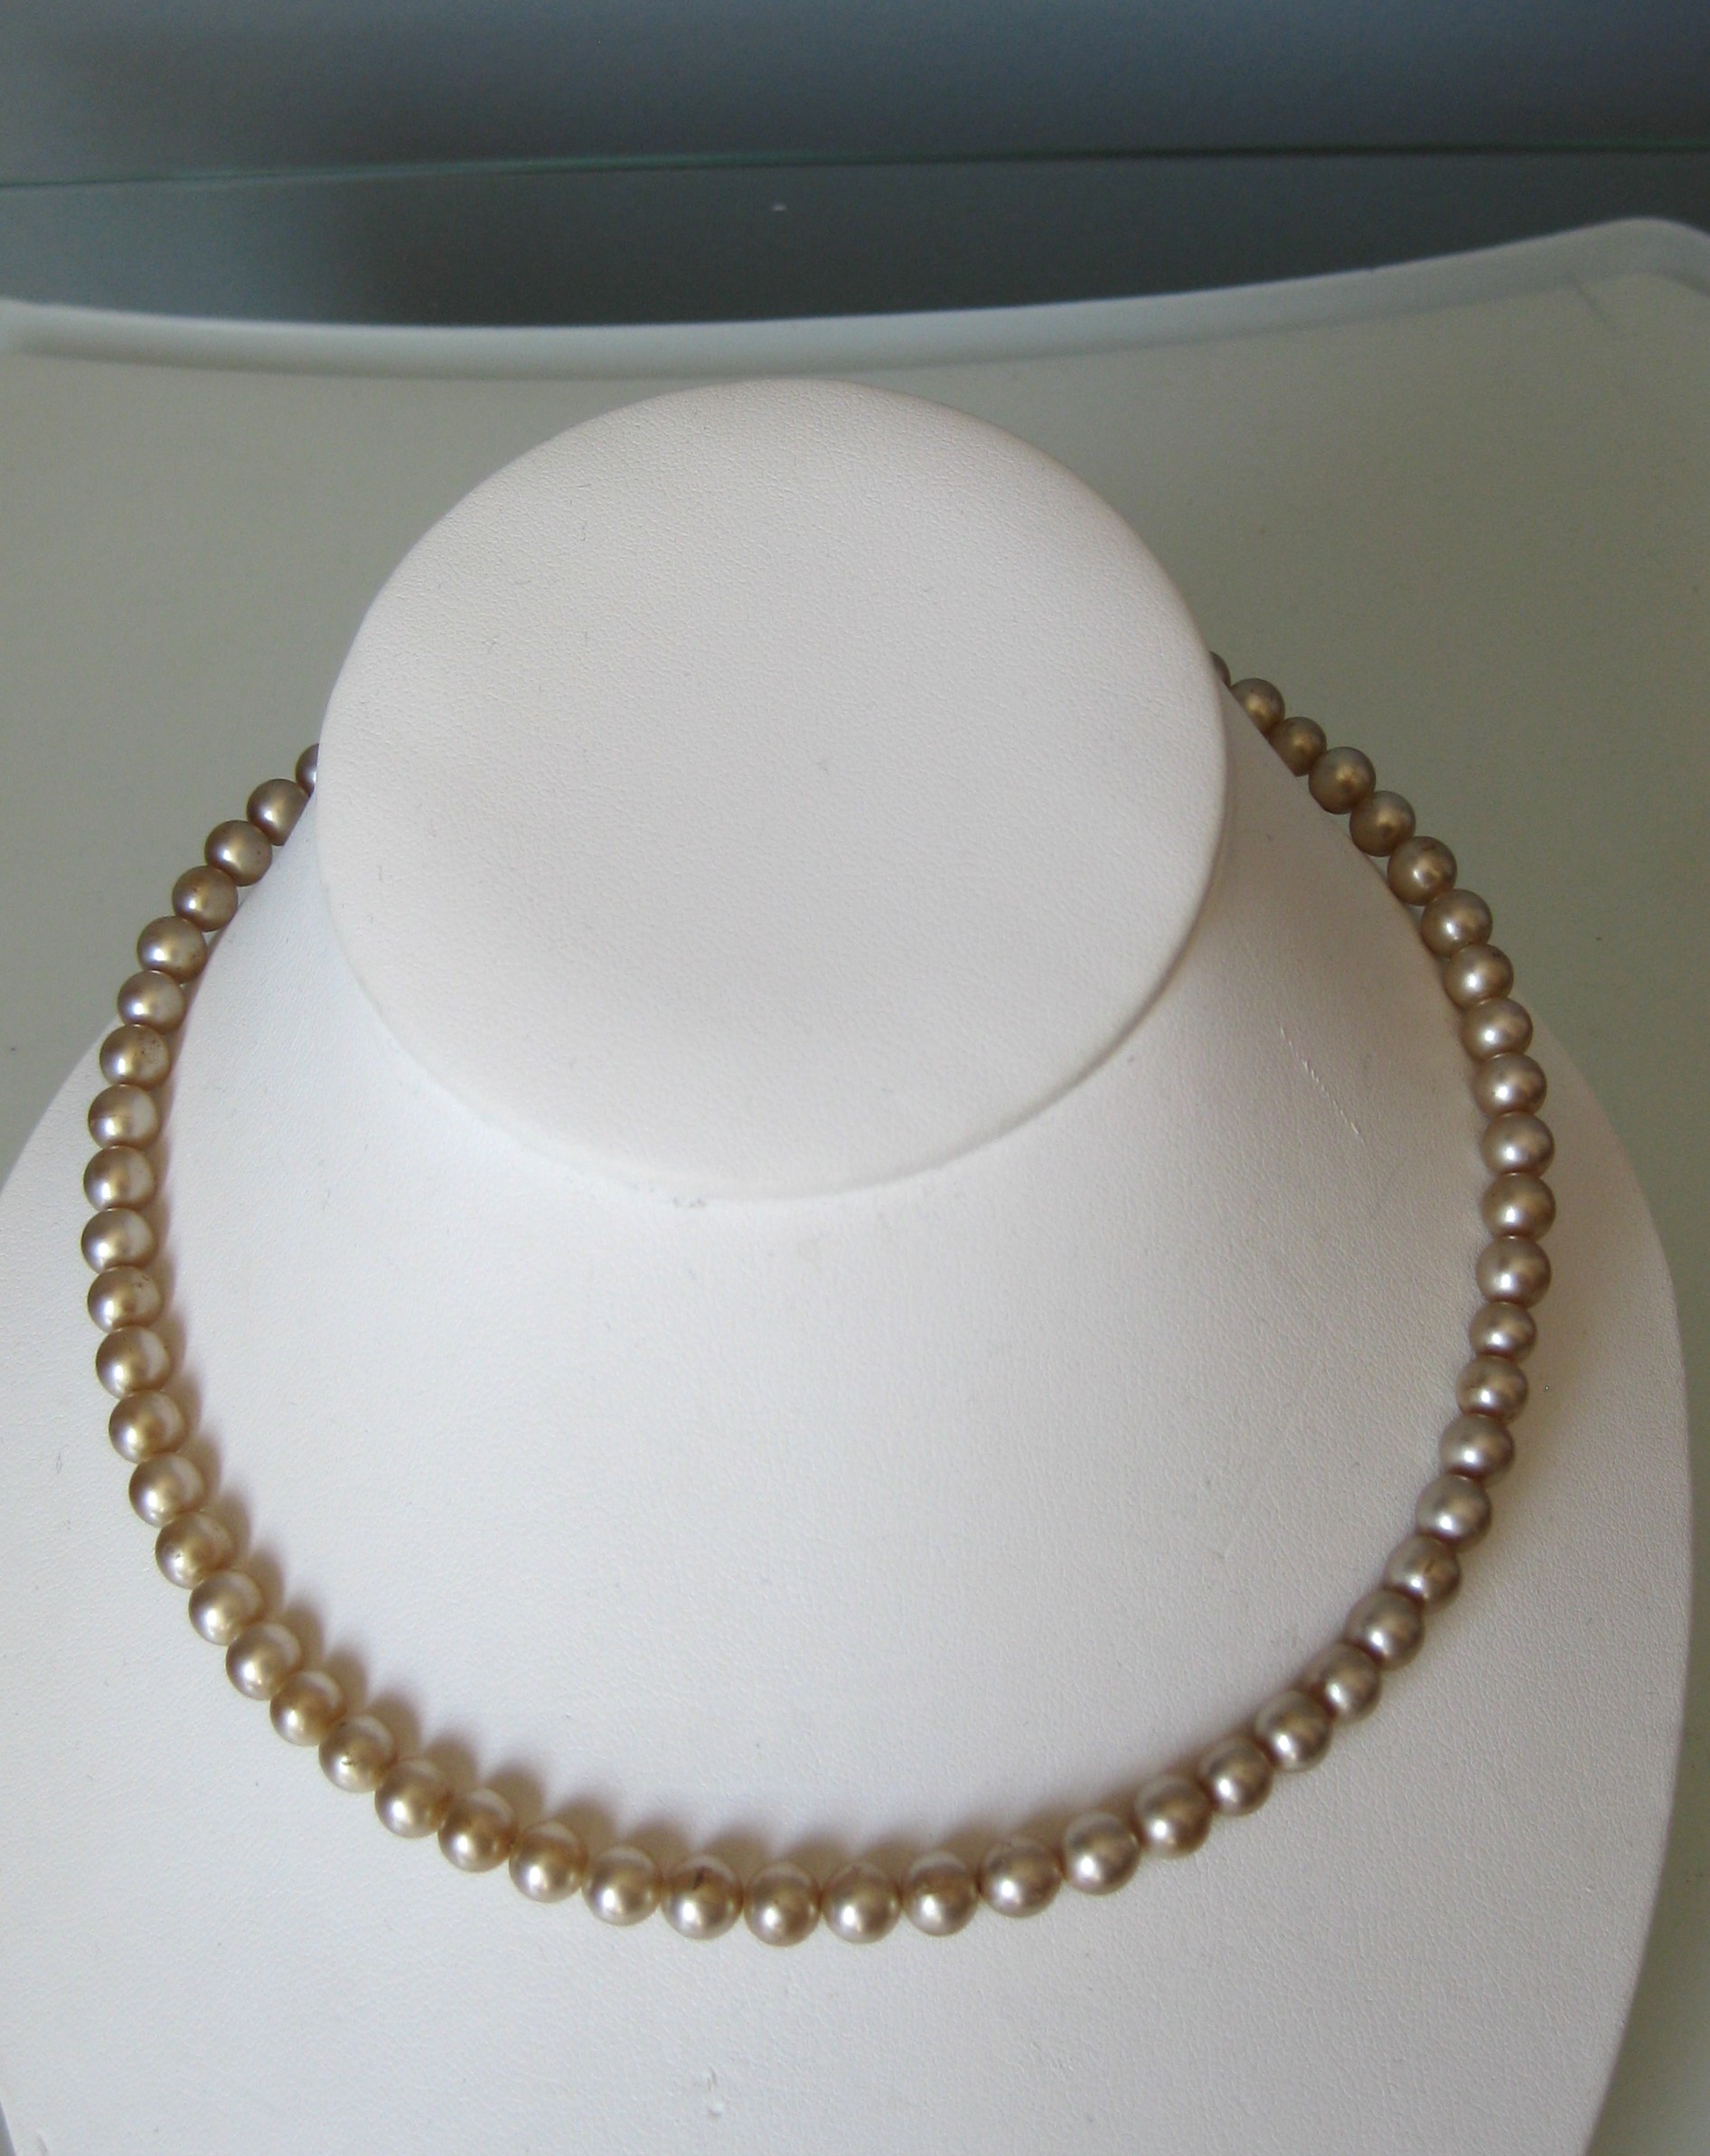 Vtg Faux Pearls, None, Size: None
Quite old strand of faux pearls.
Glass with a beautiful clasp decorated with sparkly rhinestones.
Choker length 14
No knots between the pearls
old with a bit of flaking of the finish on the pearls and also a bit of corrosion on the clasp.

thanks for looking!
#50978